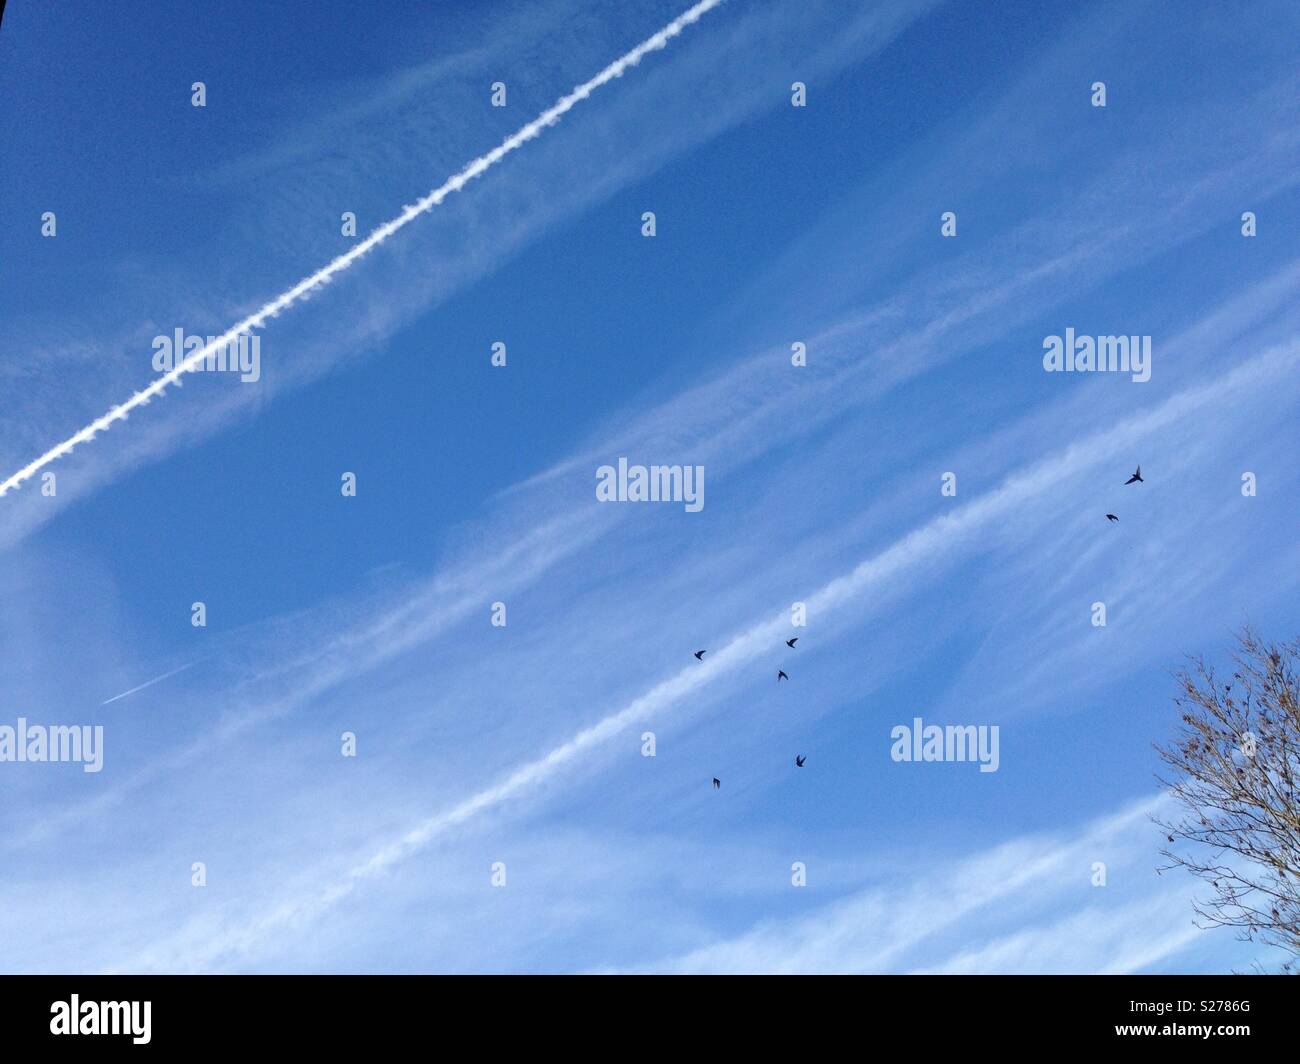 Aeroplane condensation trails known as 'persistent contrails' fill the sky with a white milky cloud that partially blocks sunlight over Sussex in the UK. Stock Photo